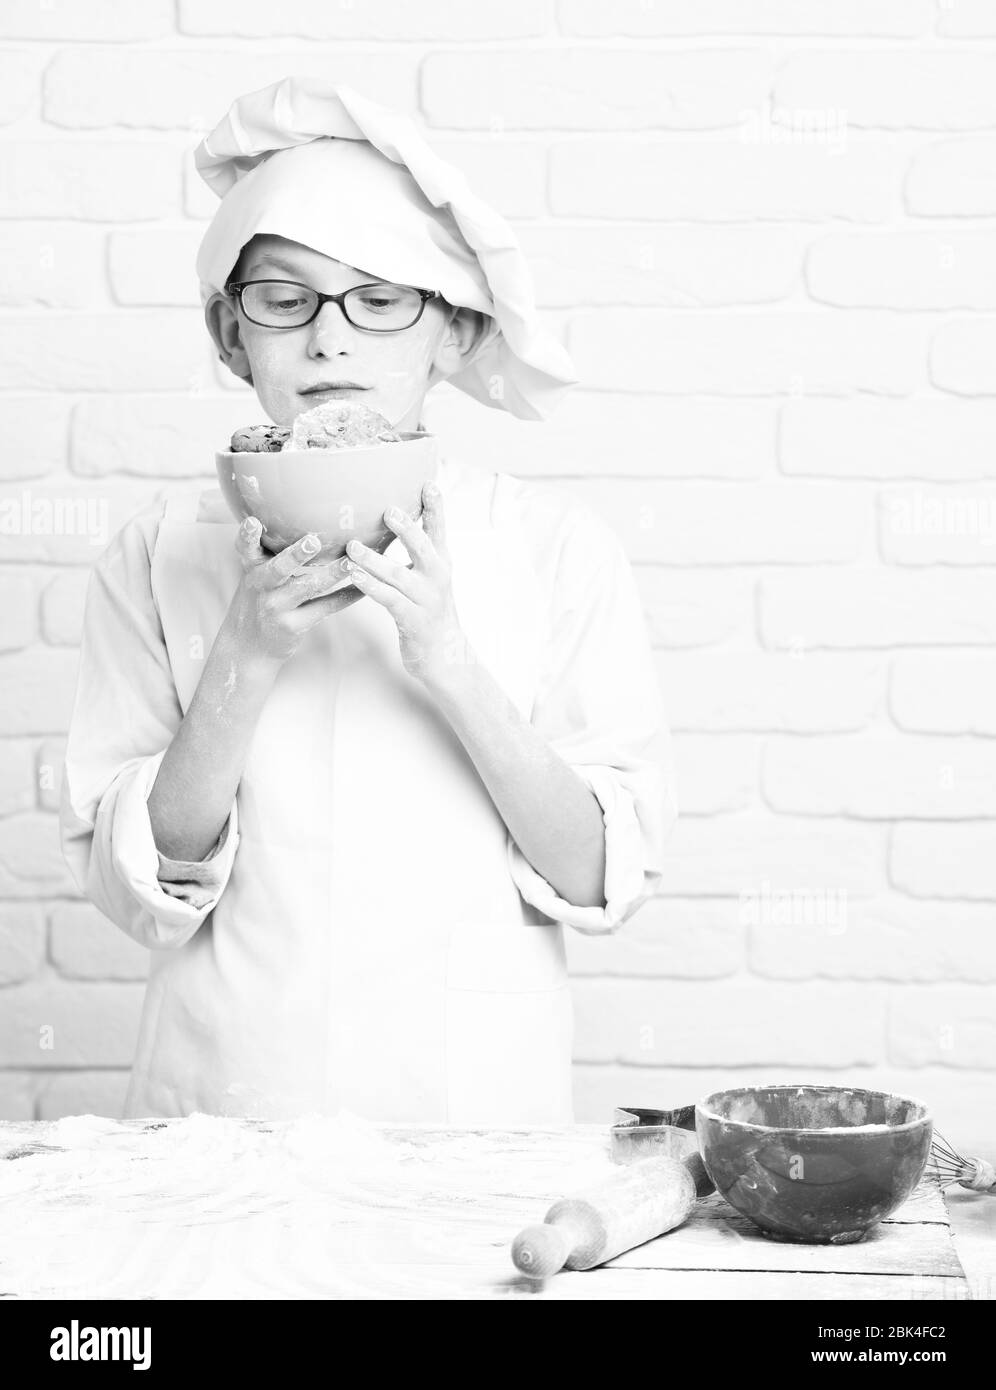 young boy cute cook chef in white uniform and hat on stained face flour with glasses standing near table with rolling pin and holding turquoise bowl with chocolate cookies, on brick wall background Stock Photo